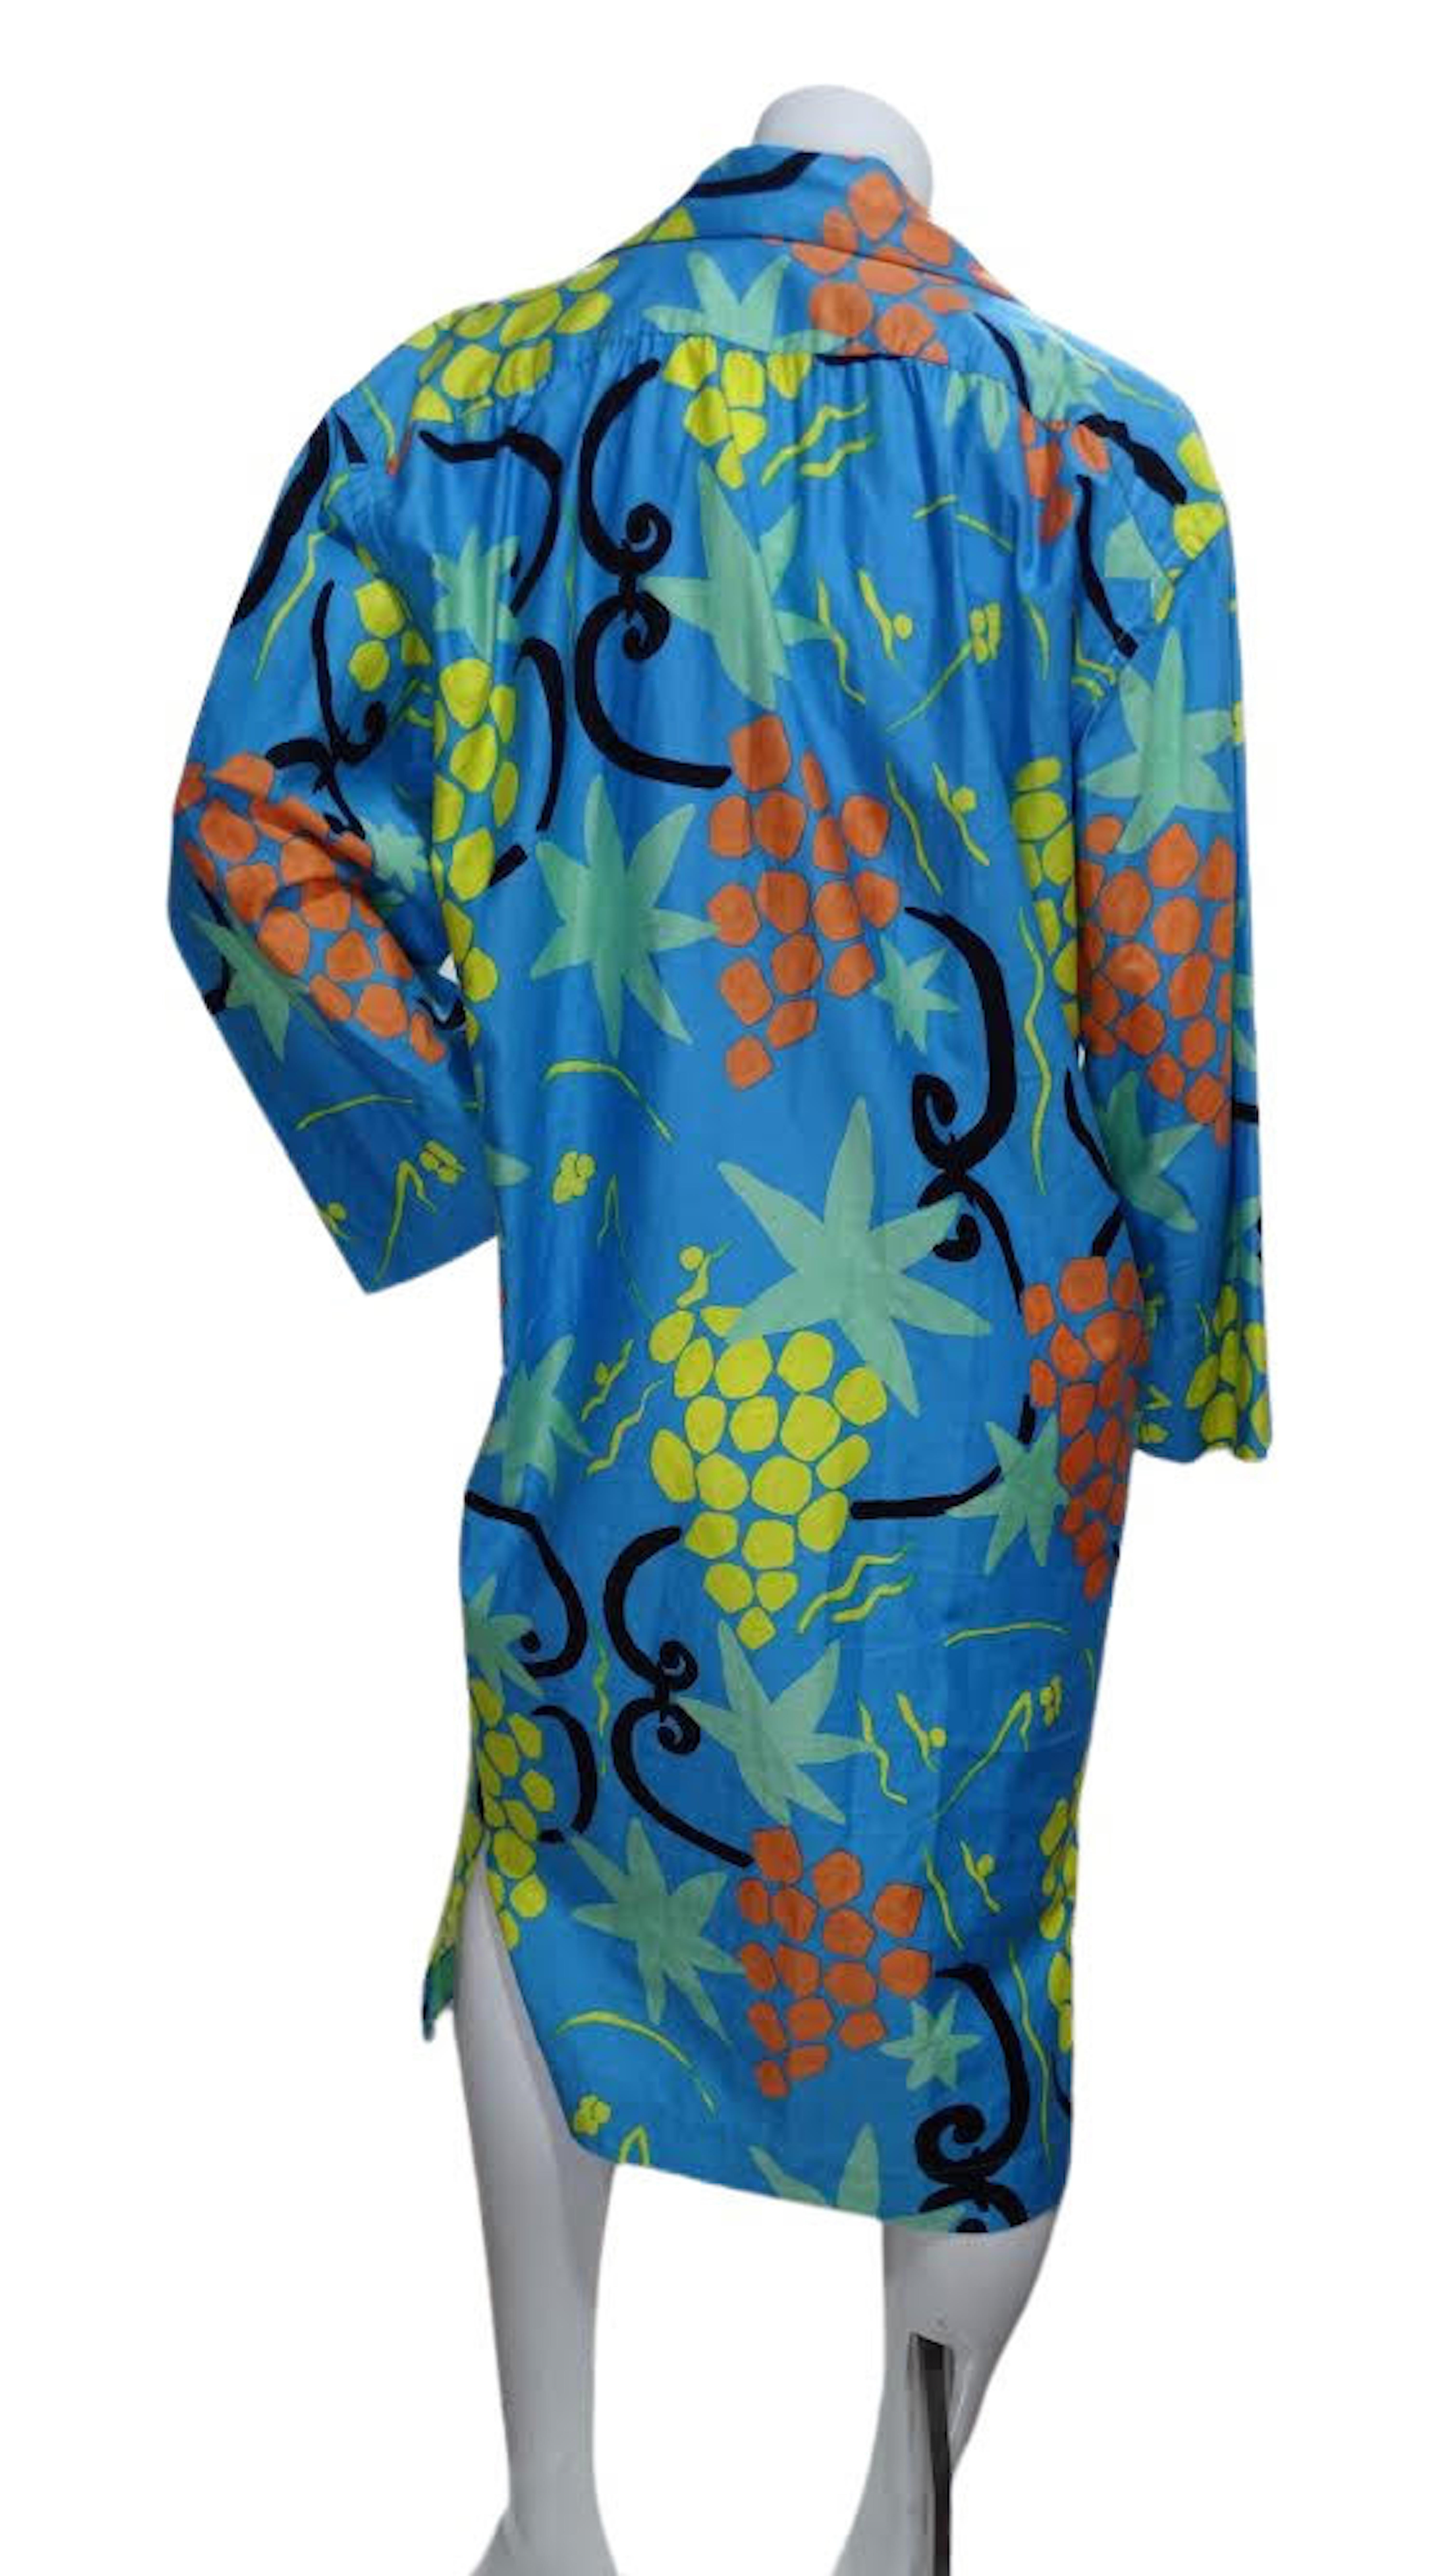 Your new summer staple is here! Circa 1980s, this YSL oversized dress is a vibrant blue and features a colorful abstract motif throughout. Includes a notched collar, wide sleeves, two front pockets at the bust and large black buttons. Marked a size